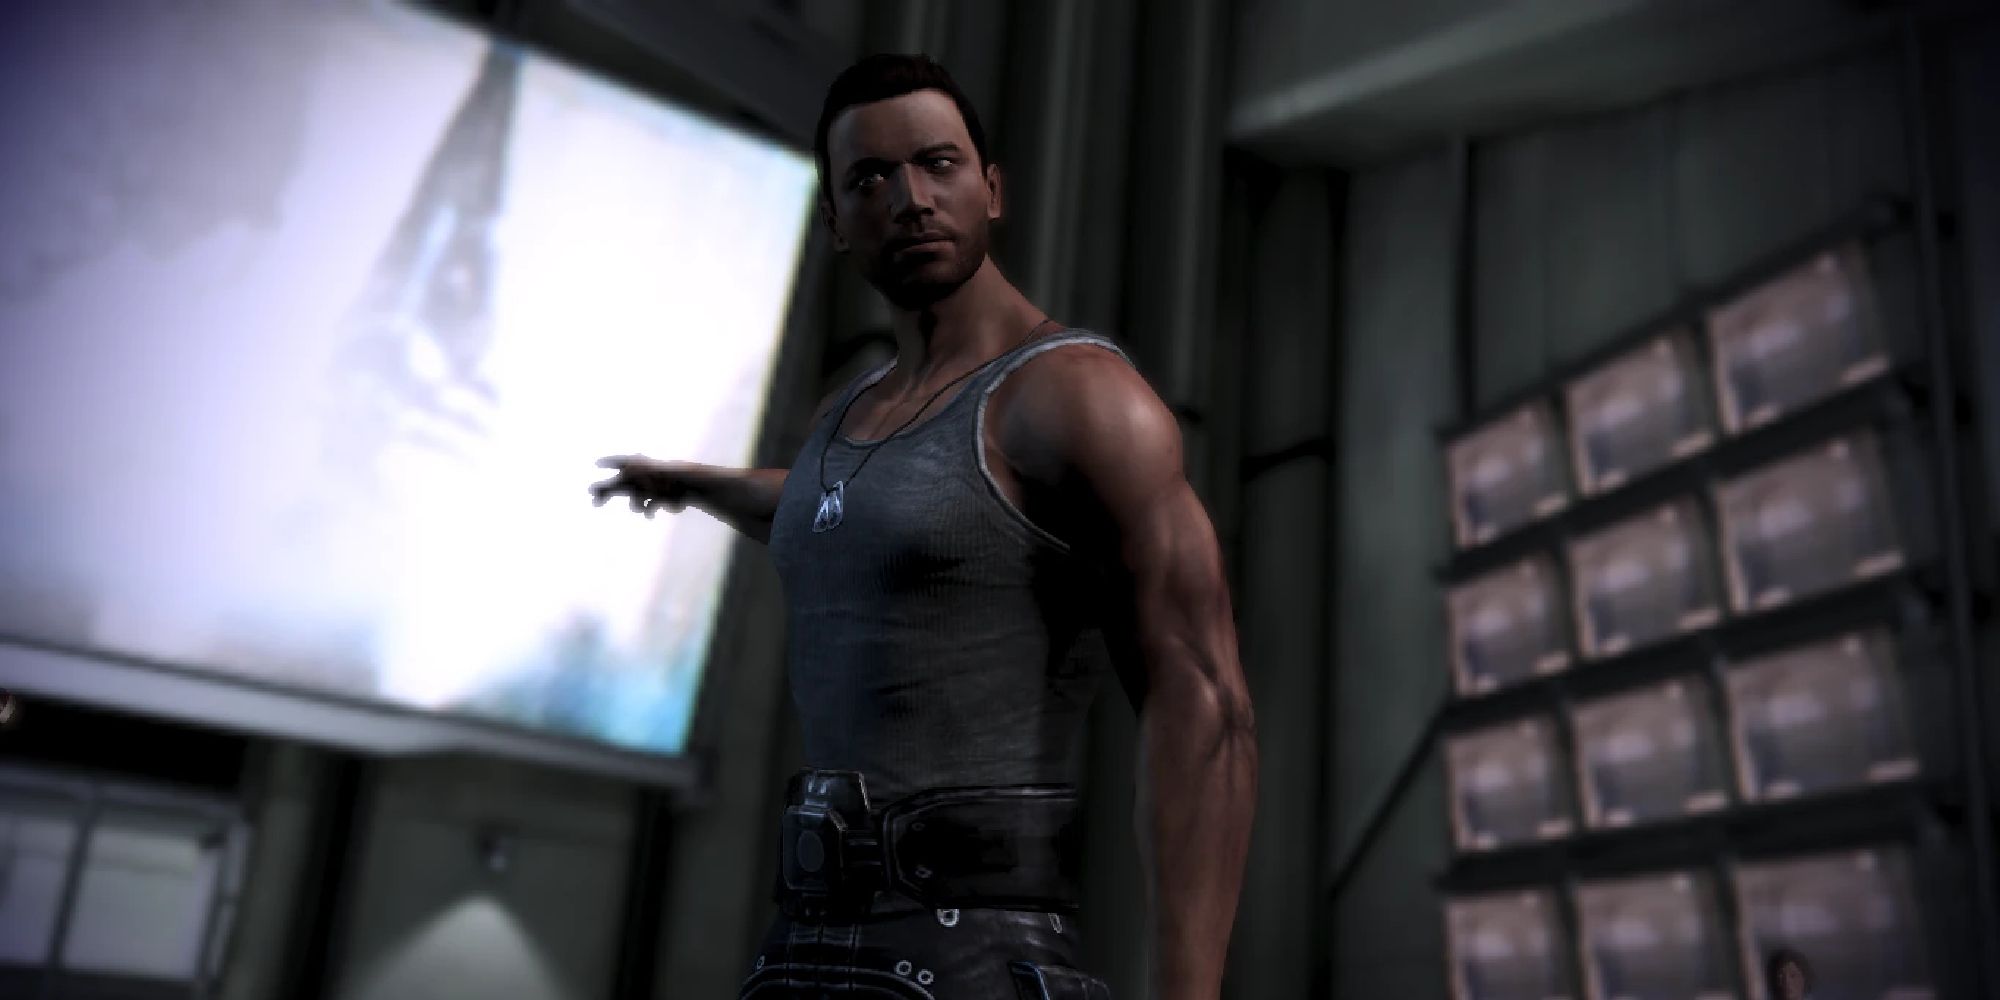 A Male Shepard wearing the tank top, pointing out of the window.